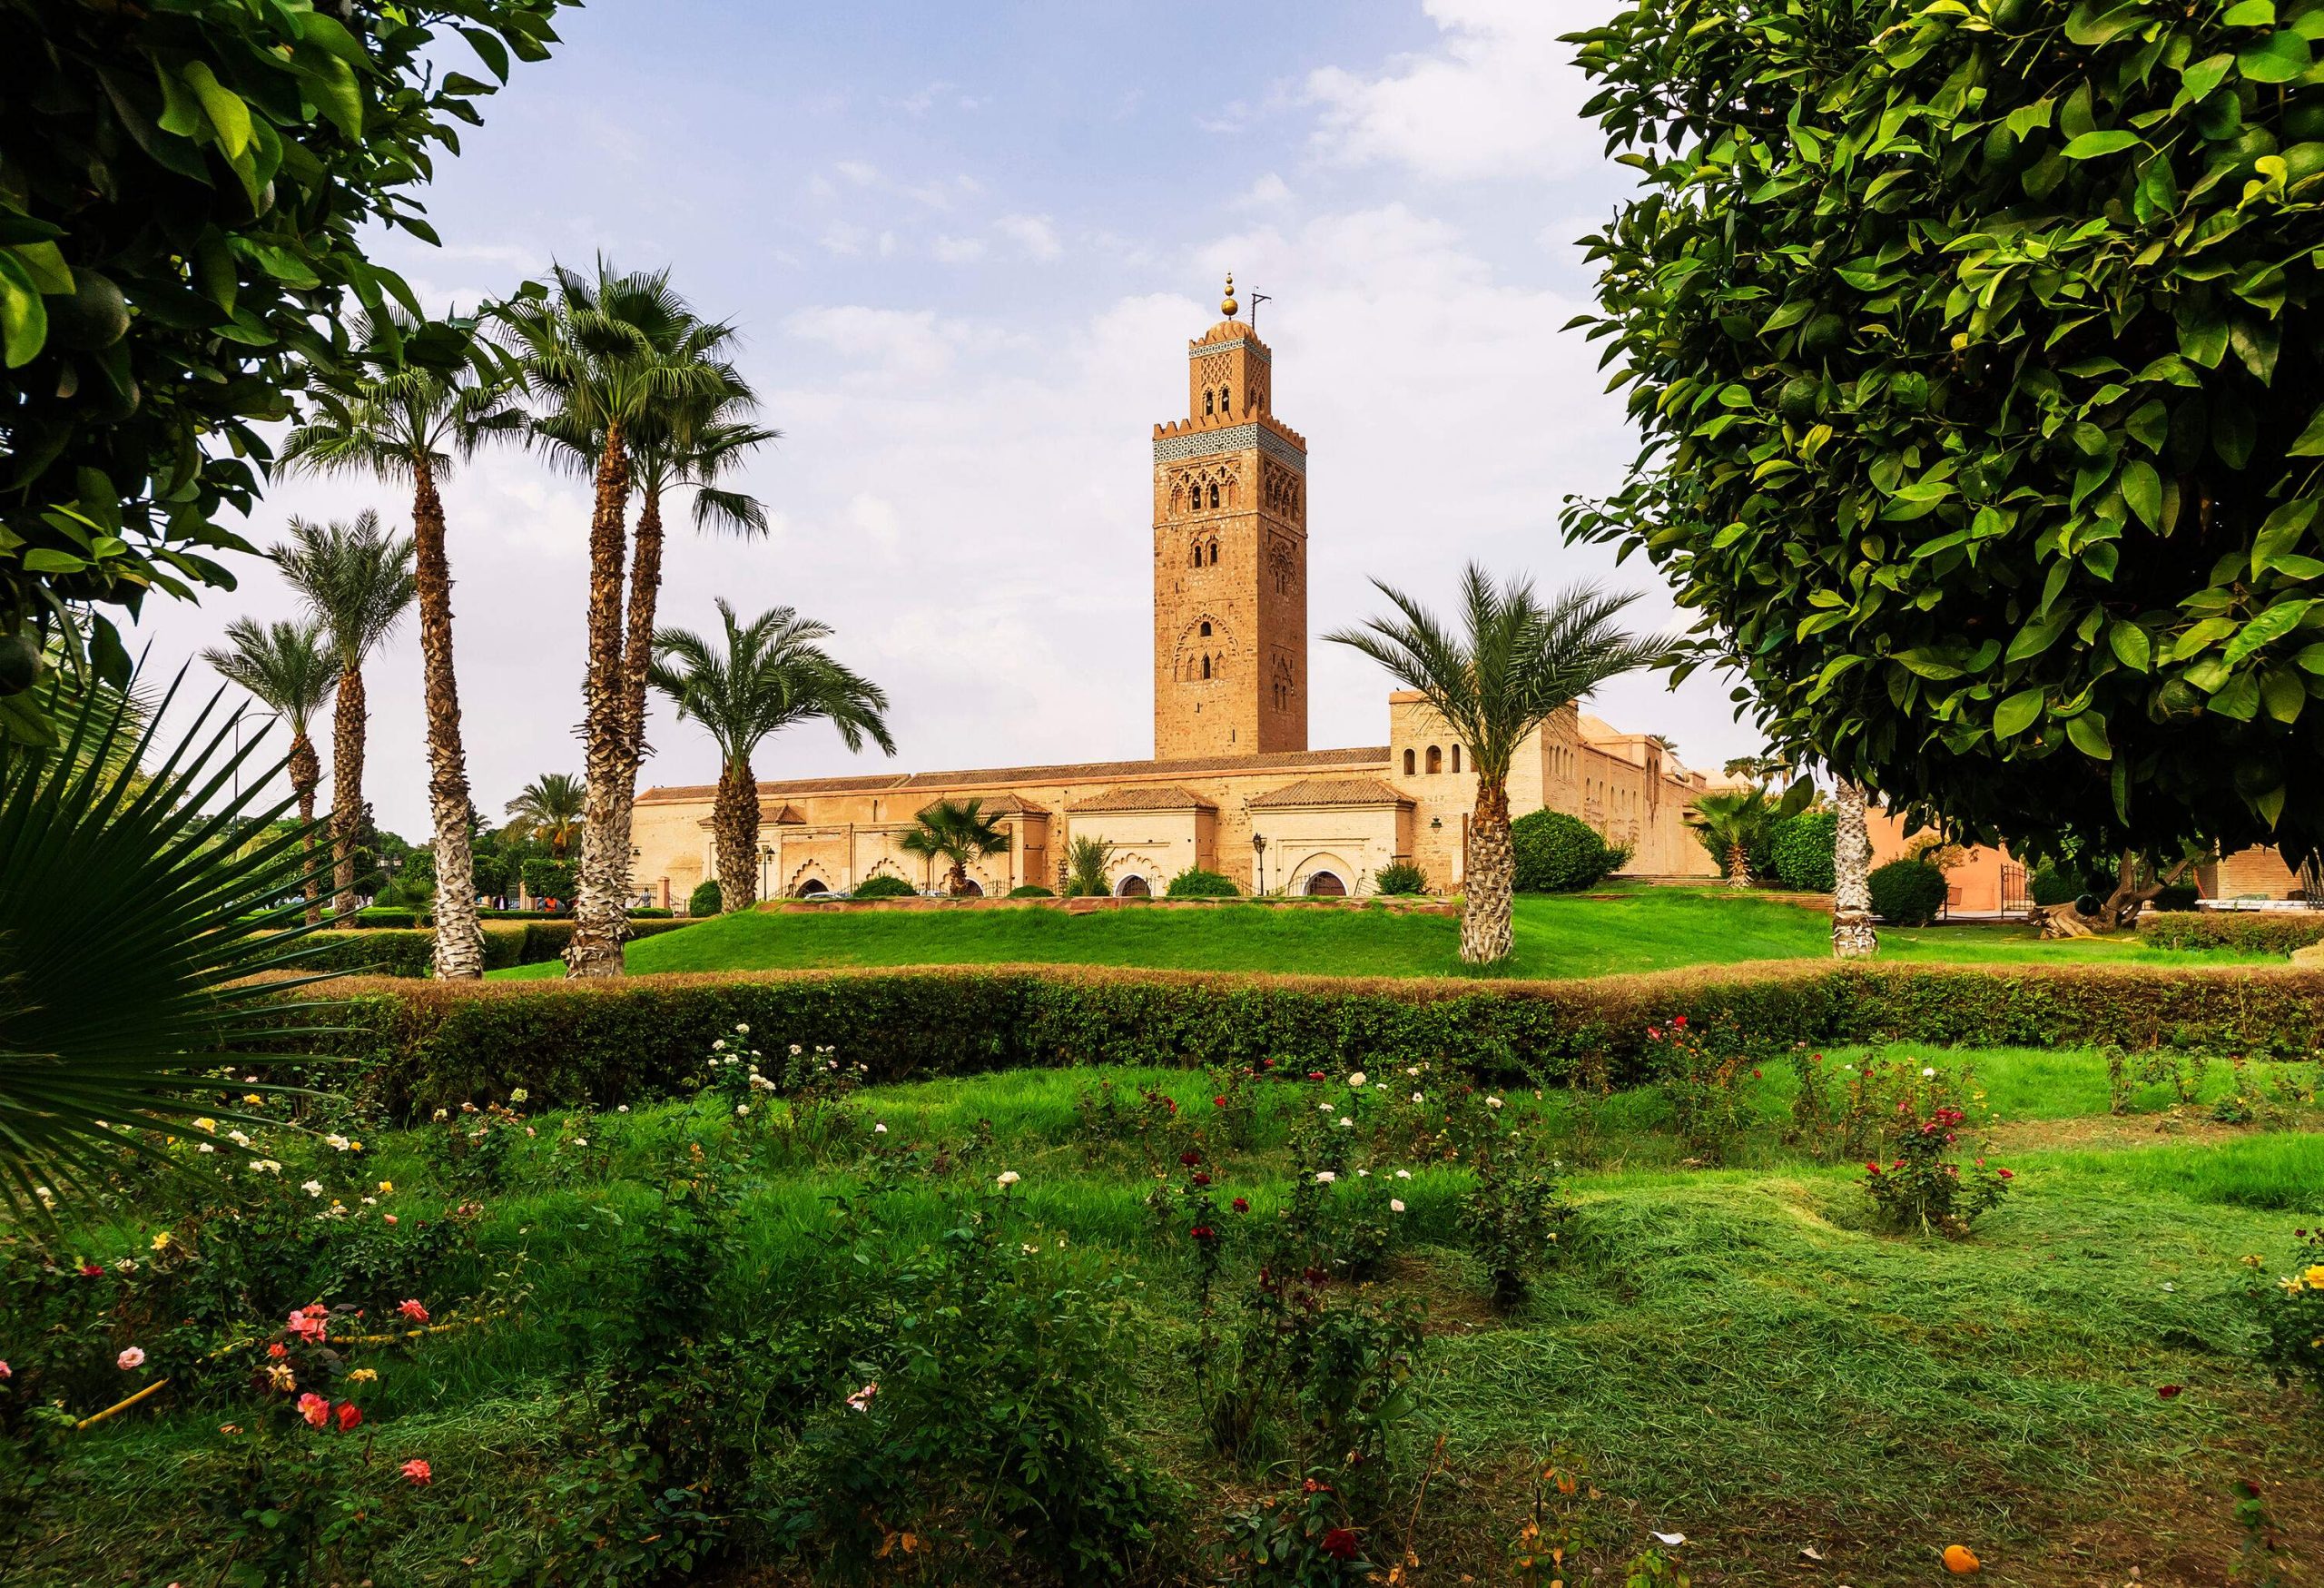 A mosque with its protruding minaret tower topped by a spire and metal orbs along a lush green garden.